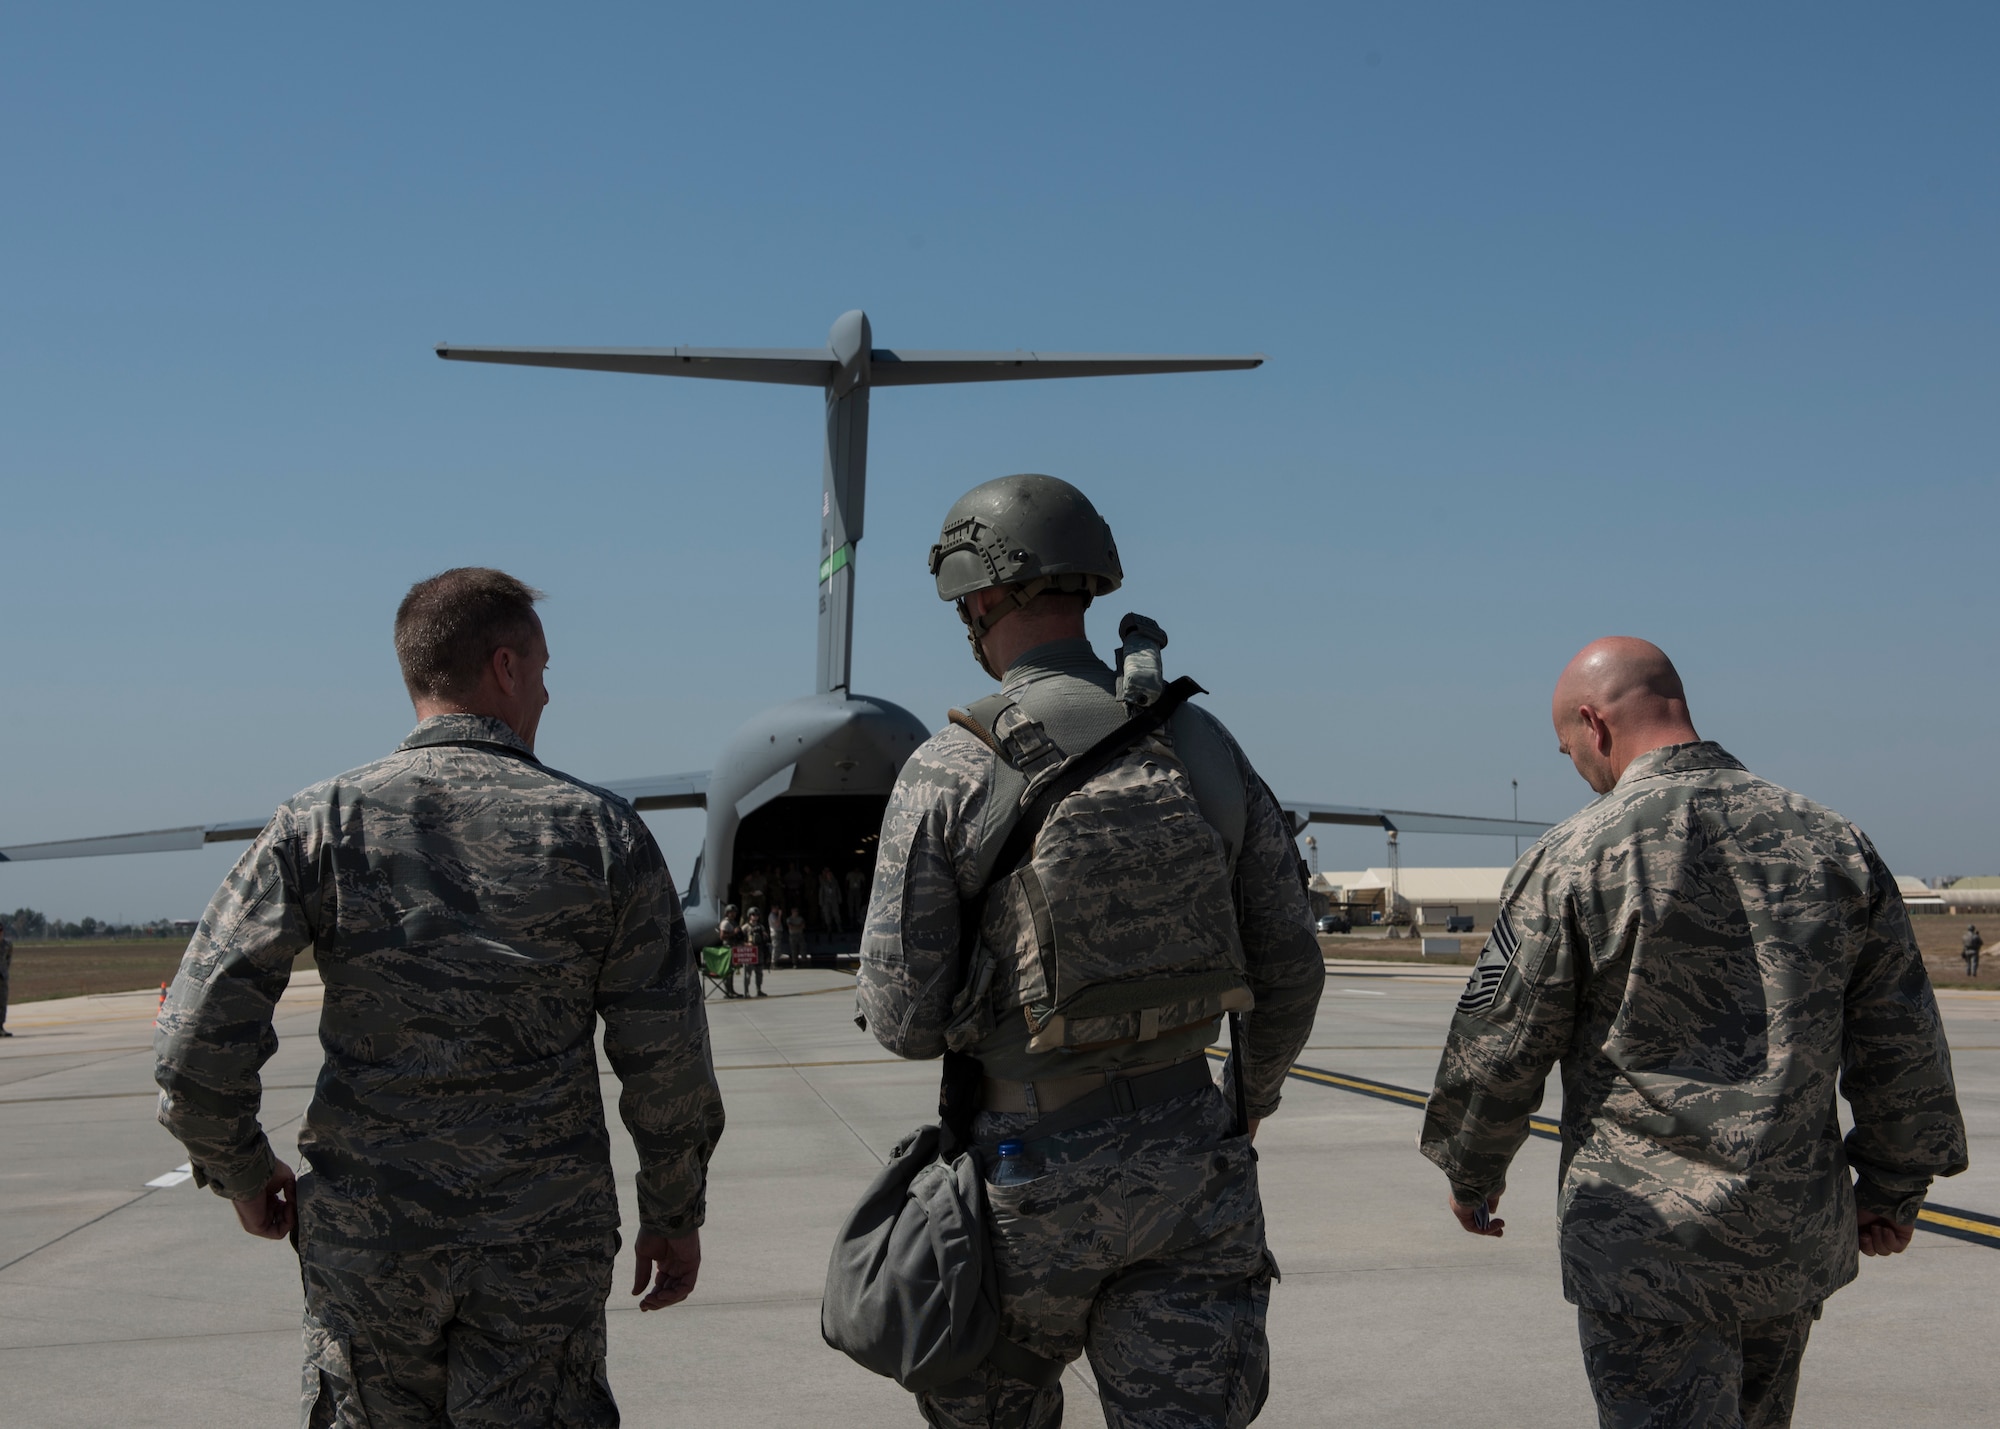 U.S. Air Force 3rd Air Force commander Major Gen. John Wood and Command Chief Master Sgt. Anthony Cruz Munoz watch a 39th Security Force Squadron exercise at Incirlik Air Base, Turkey, 2018.